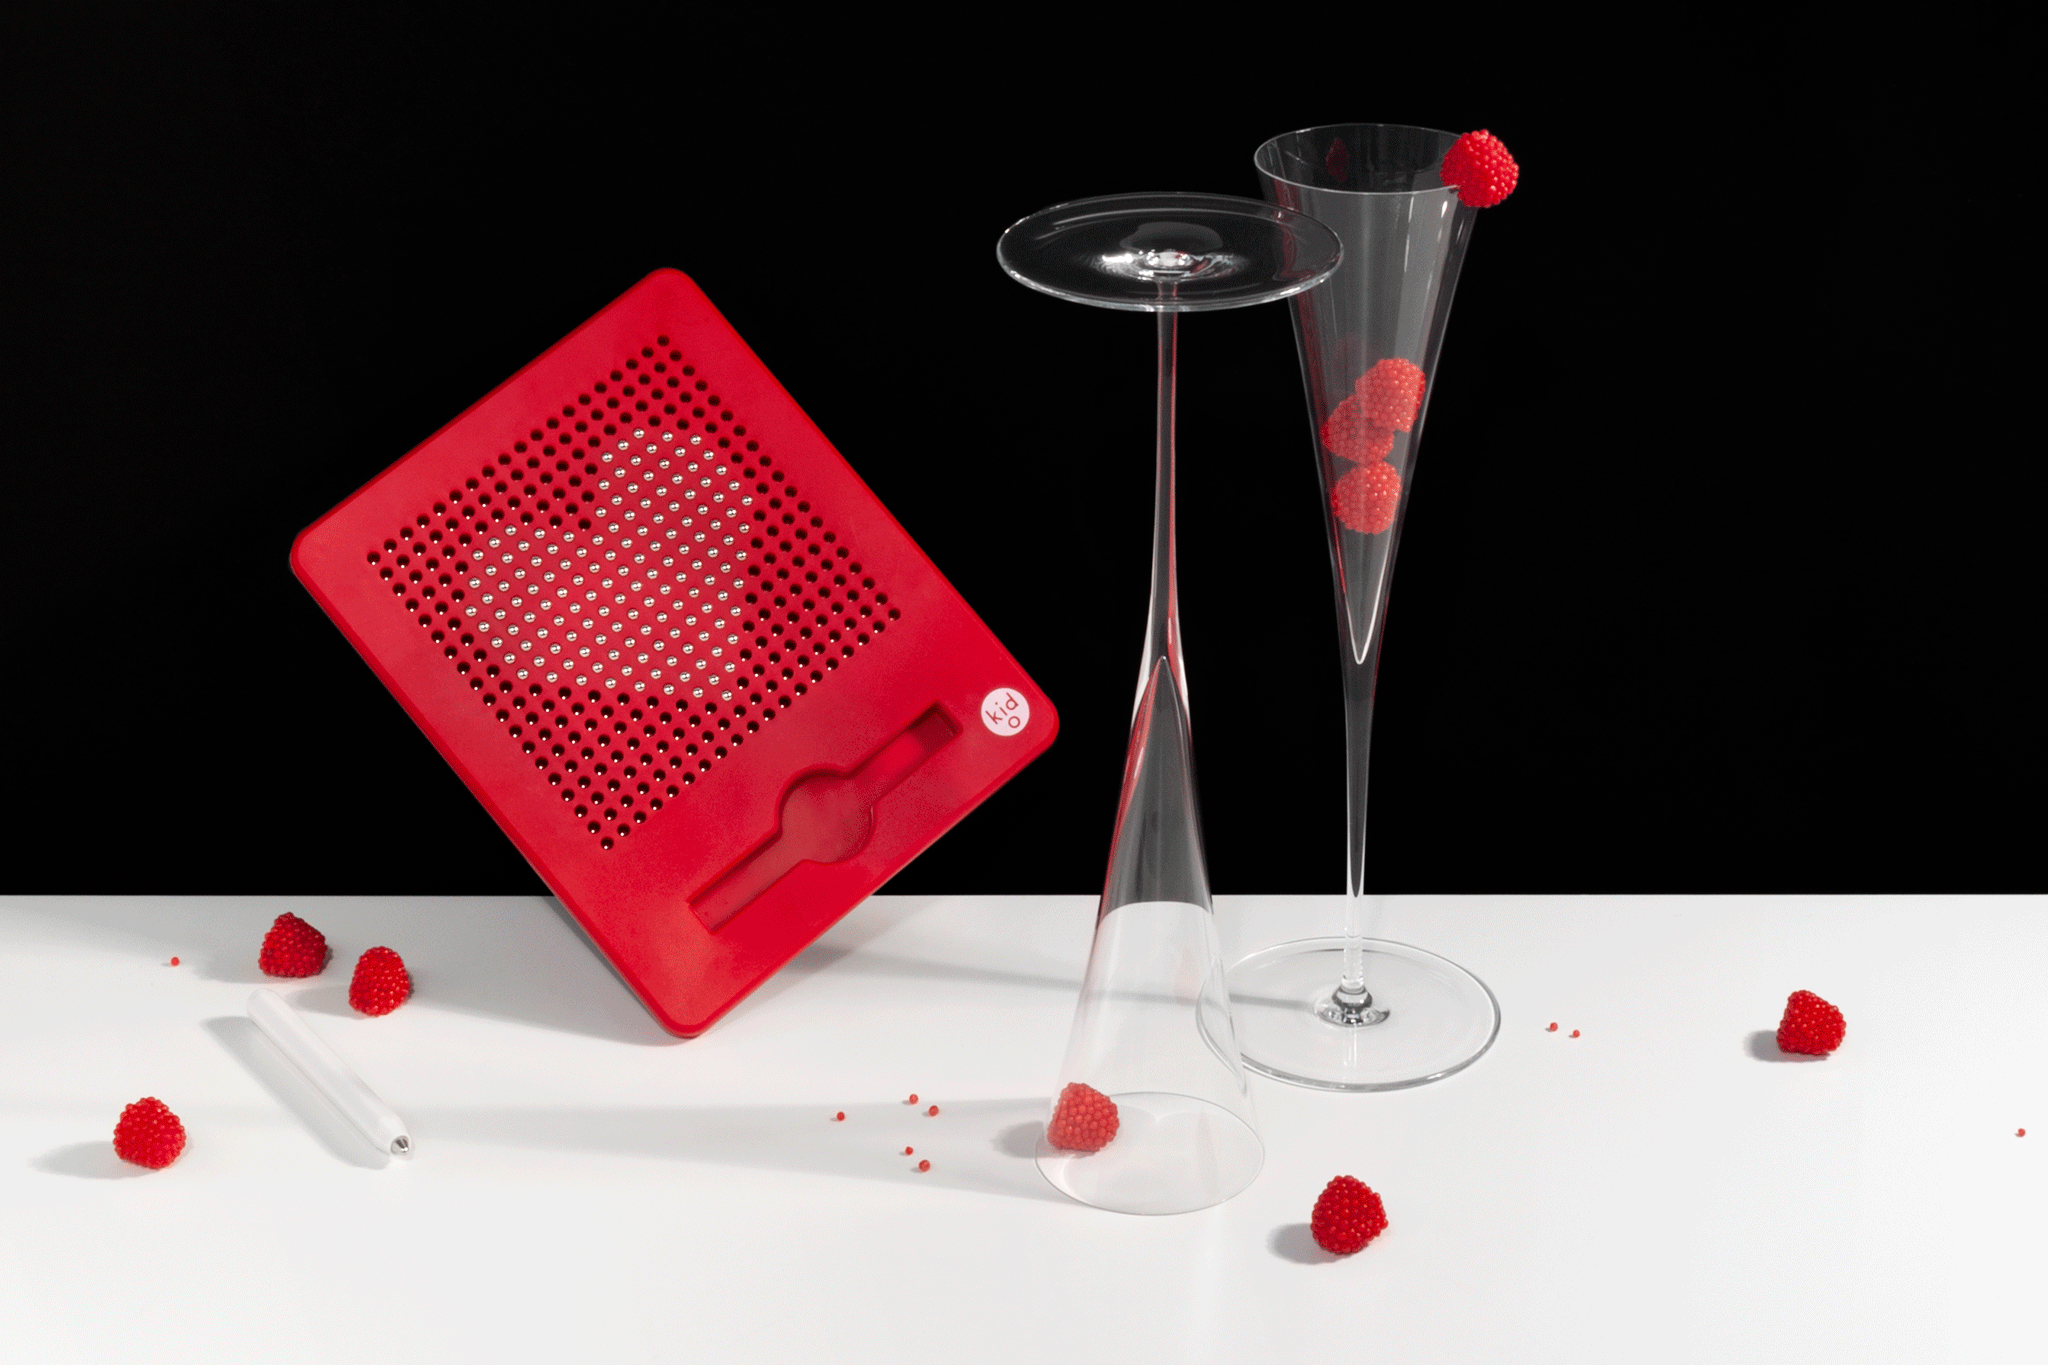 Two champagne glasses stand to the right of a red magnetic drawing board with a drawing of a heart that is animated to beat larger and smaller. There are red raspberry candies in and around the glasses, on a white tabletop against a black background.